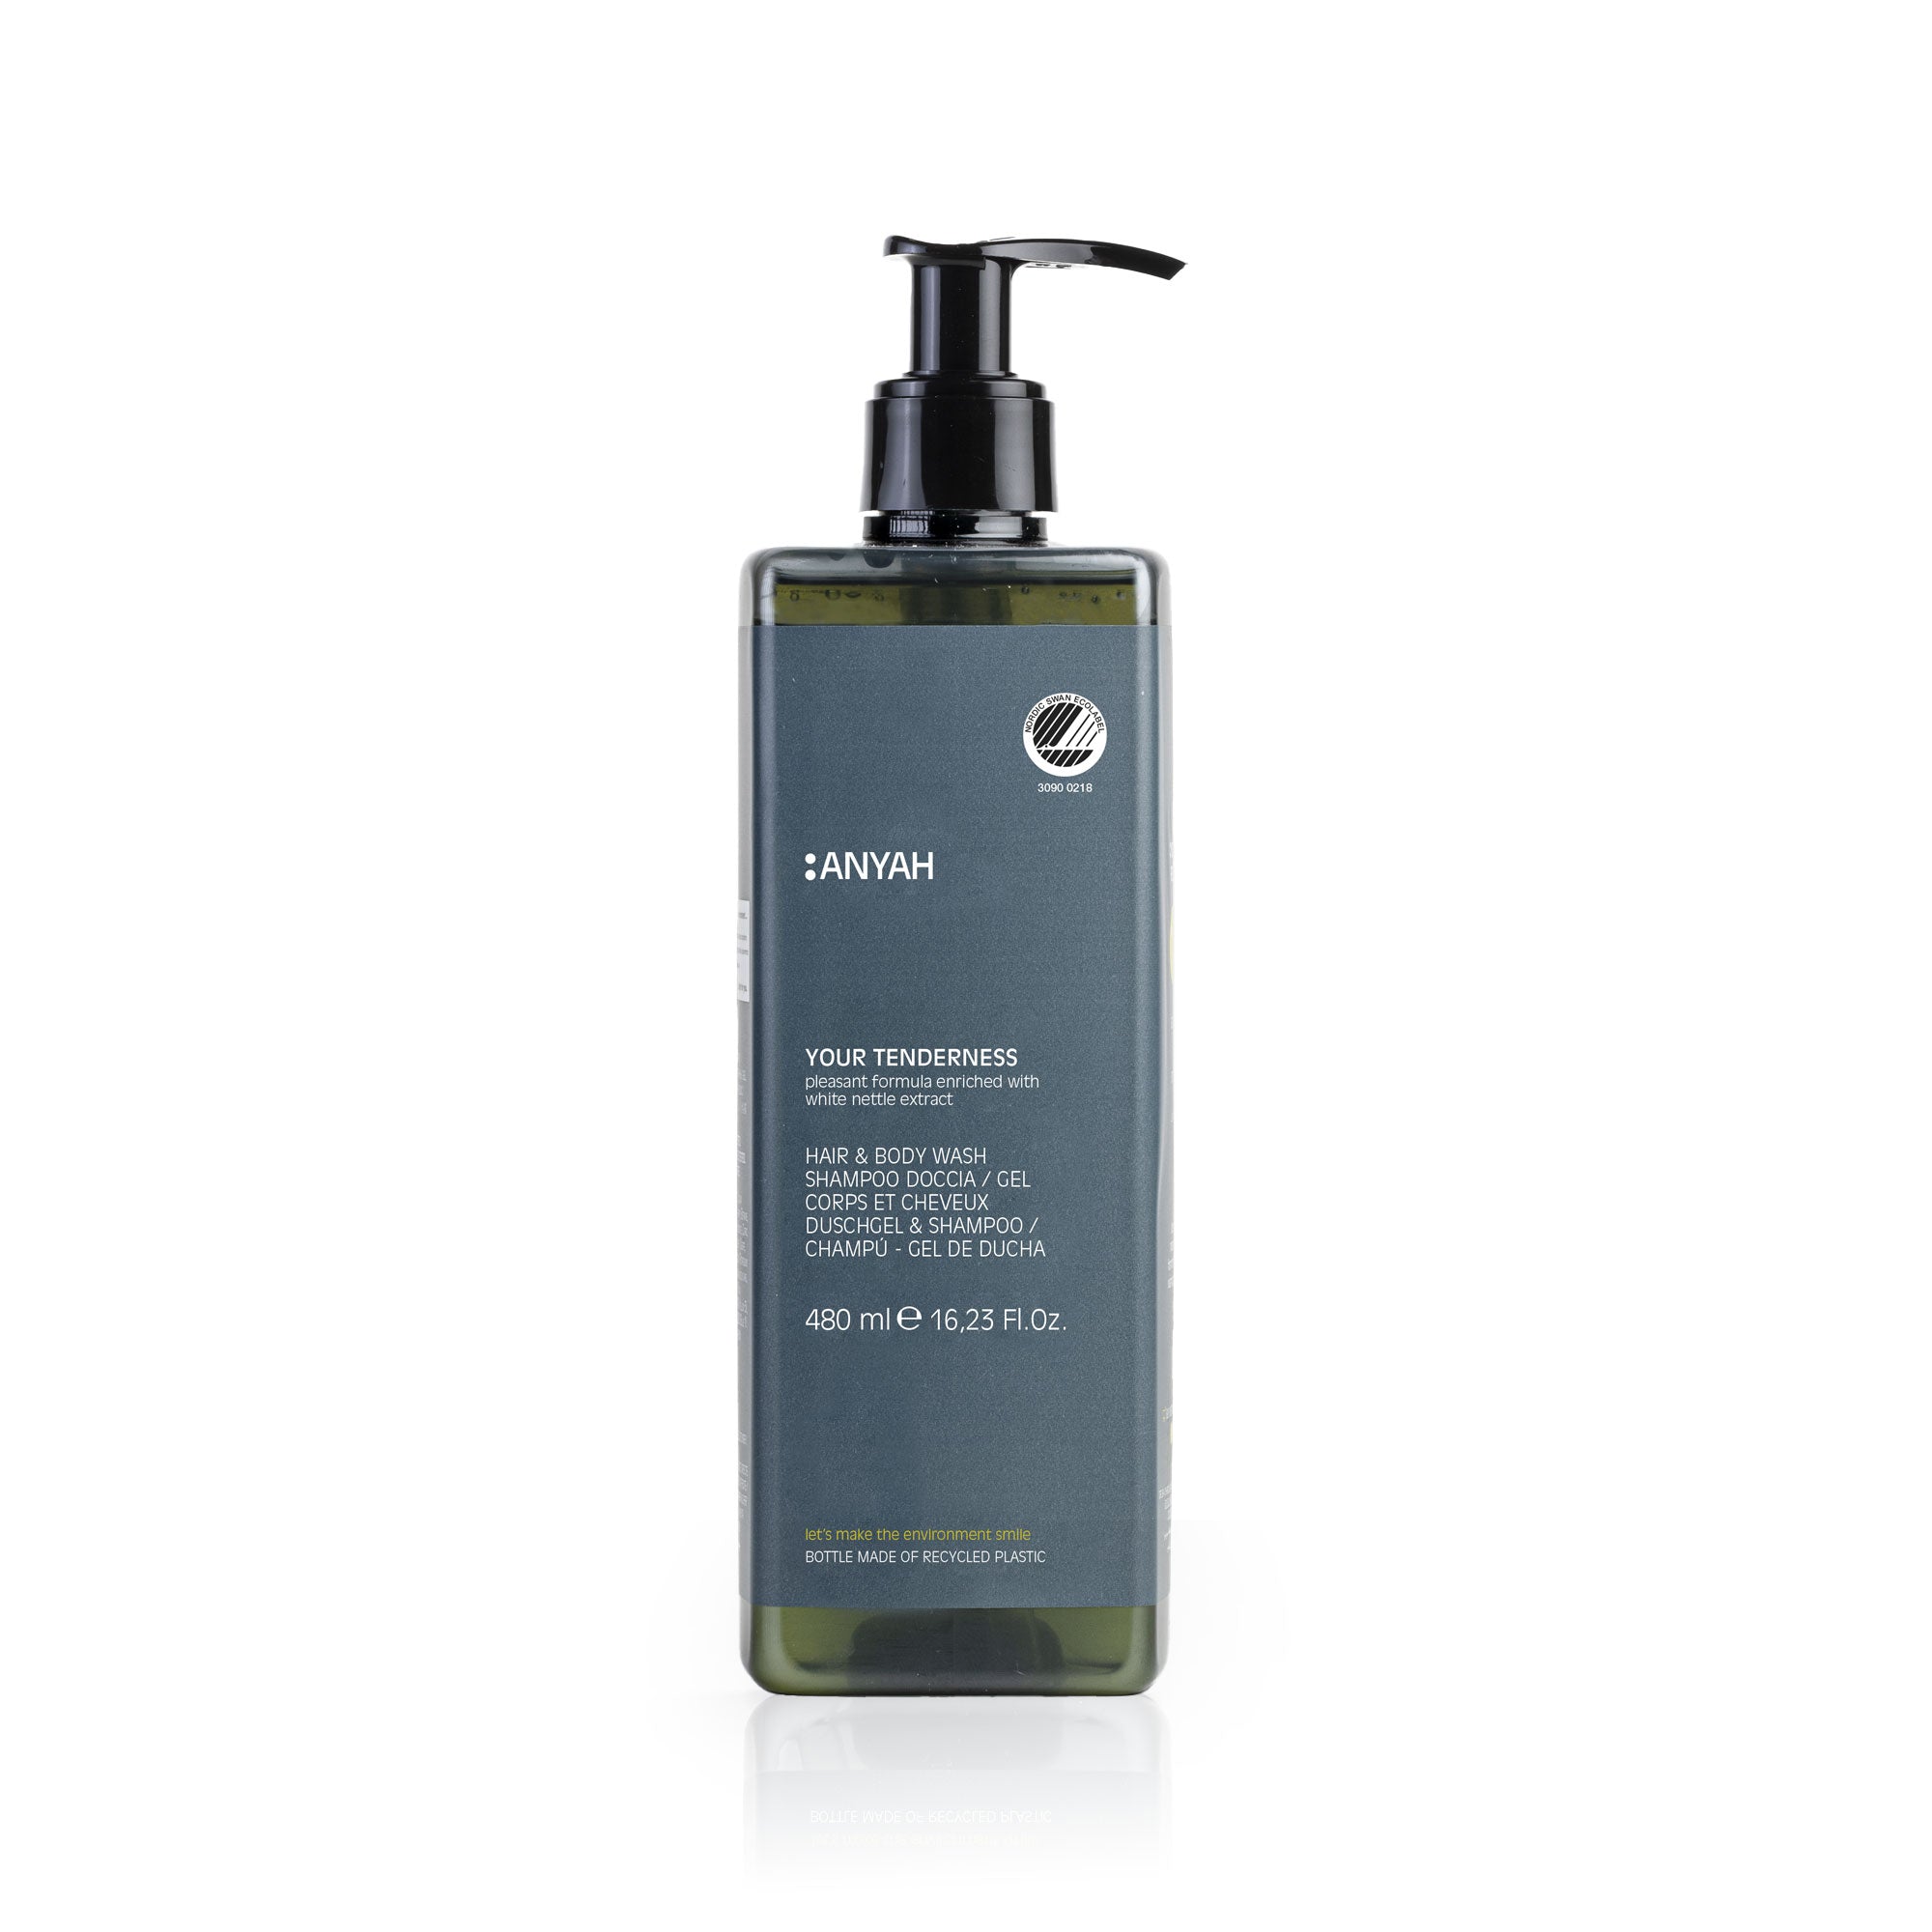 Anyah Gentle Hair & Body Wash With Locked Pump - Nordic Ecolabel Certified (480 ml)